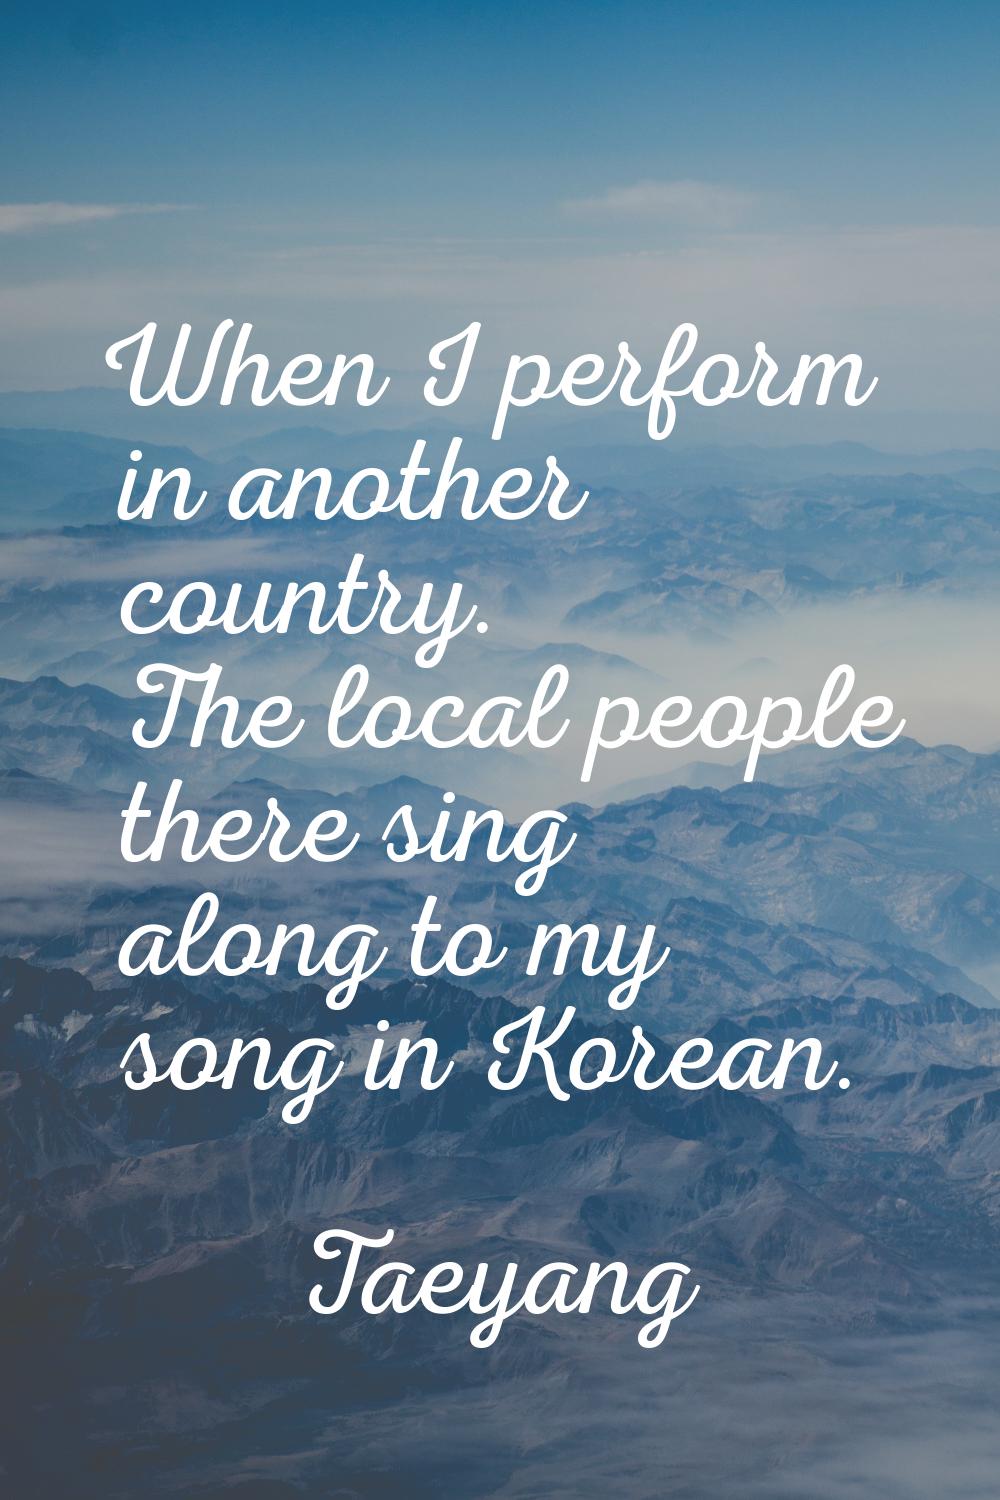 When I perform in another country. The local people there sing along to my song in Korean.